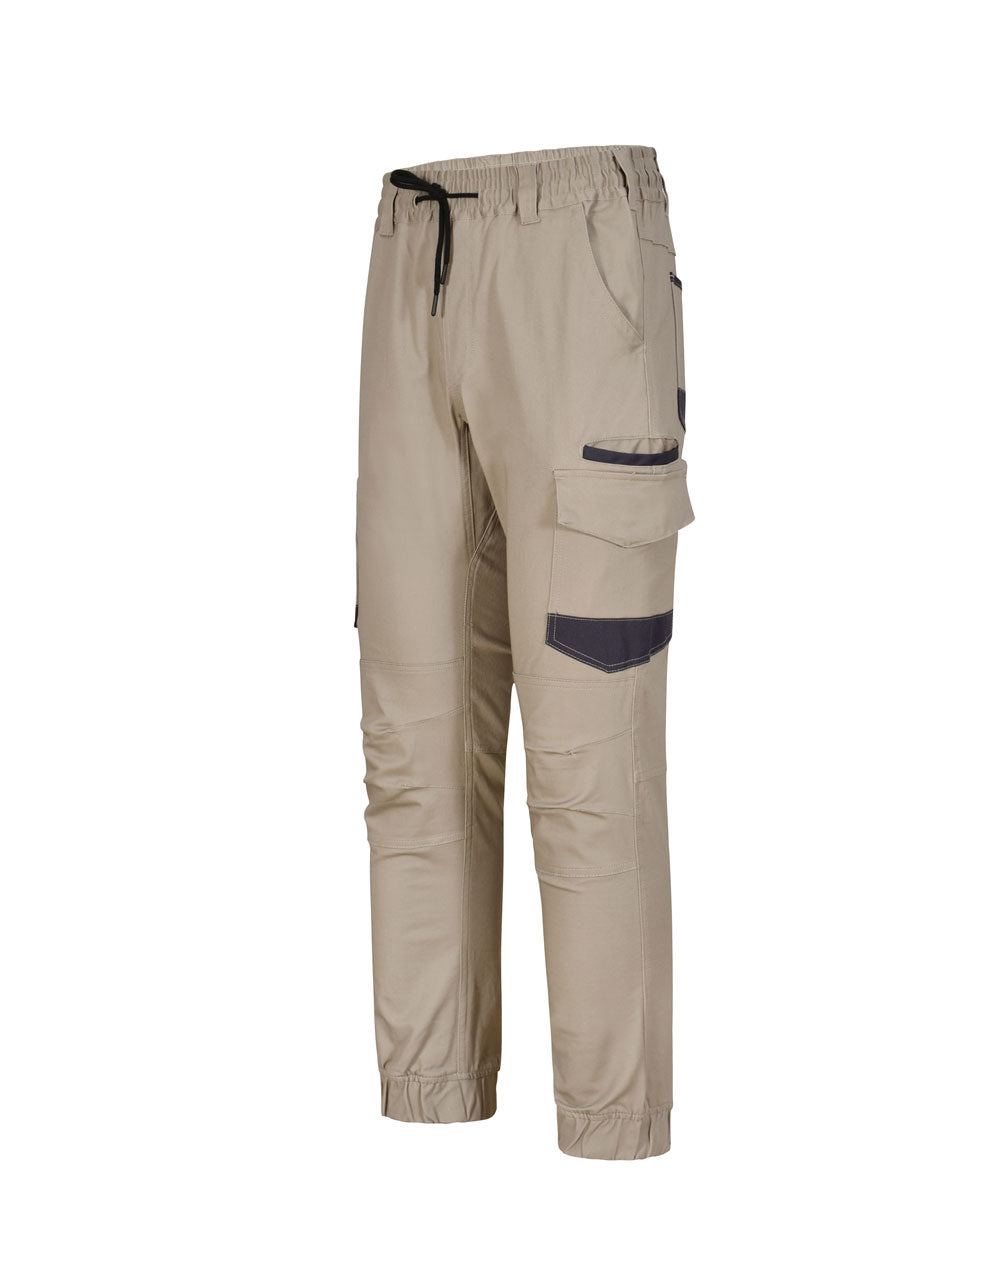 Cotton Stretch Drill Cuffed Work Pants - made by AIW